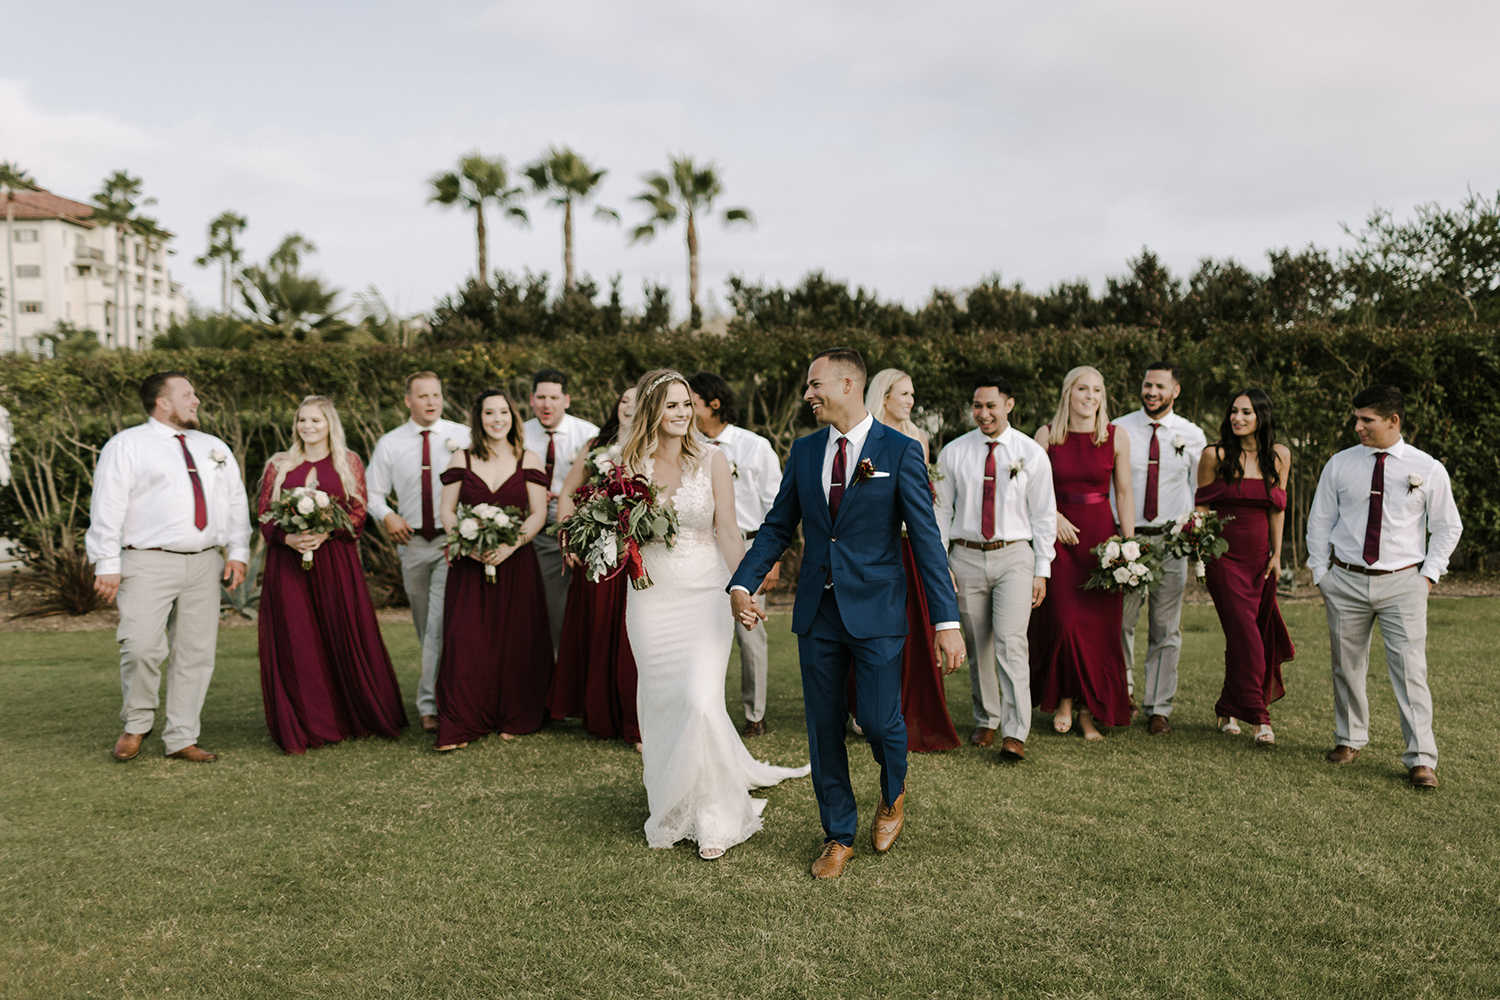 Merlot Colored Wedding / Monarch Beach Resort Wedding / Oceanfront Wedding / Greenery / Lucky Day Events Co. / Morgan Hydinger Photography and Videography